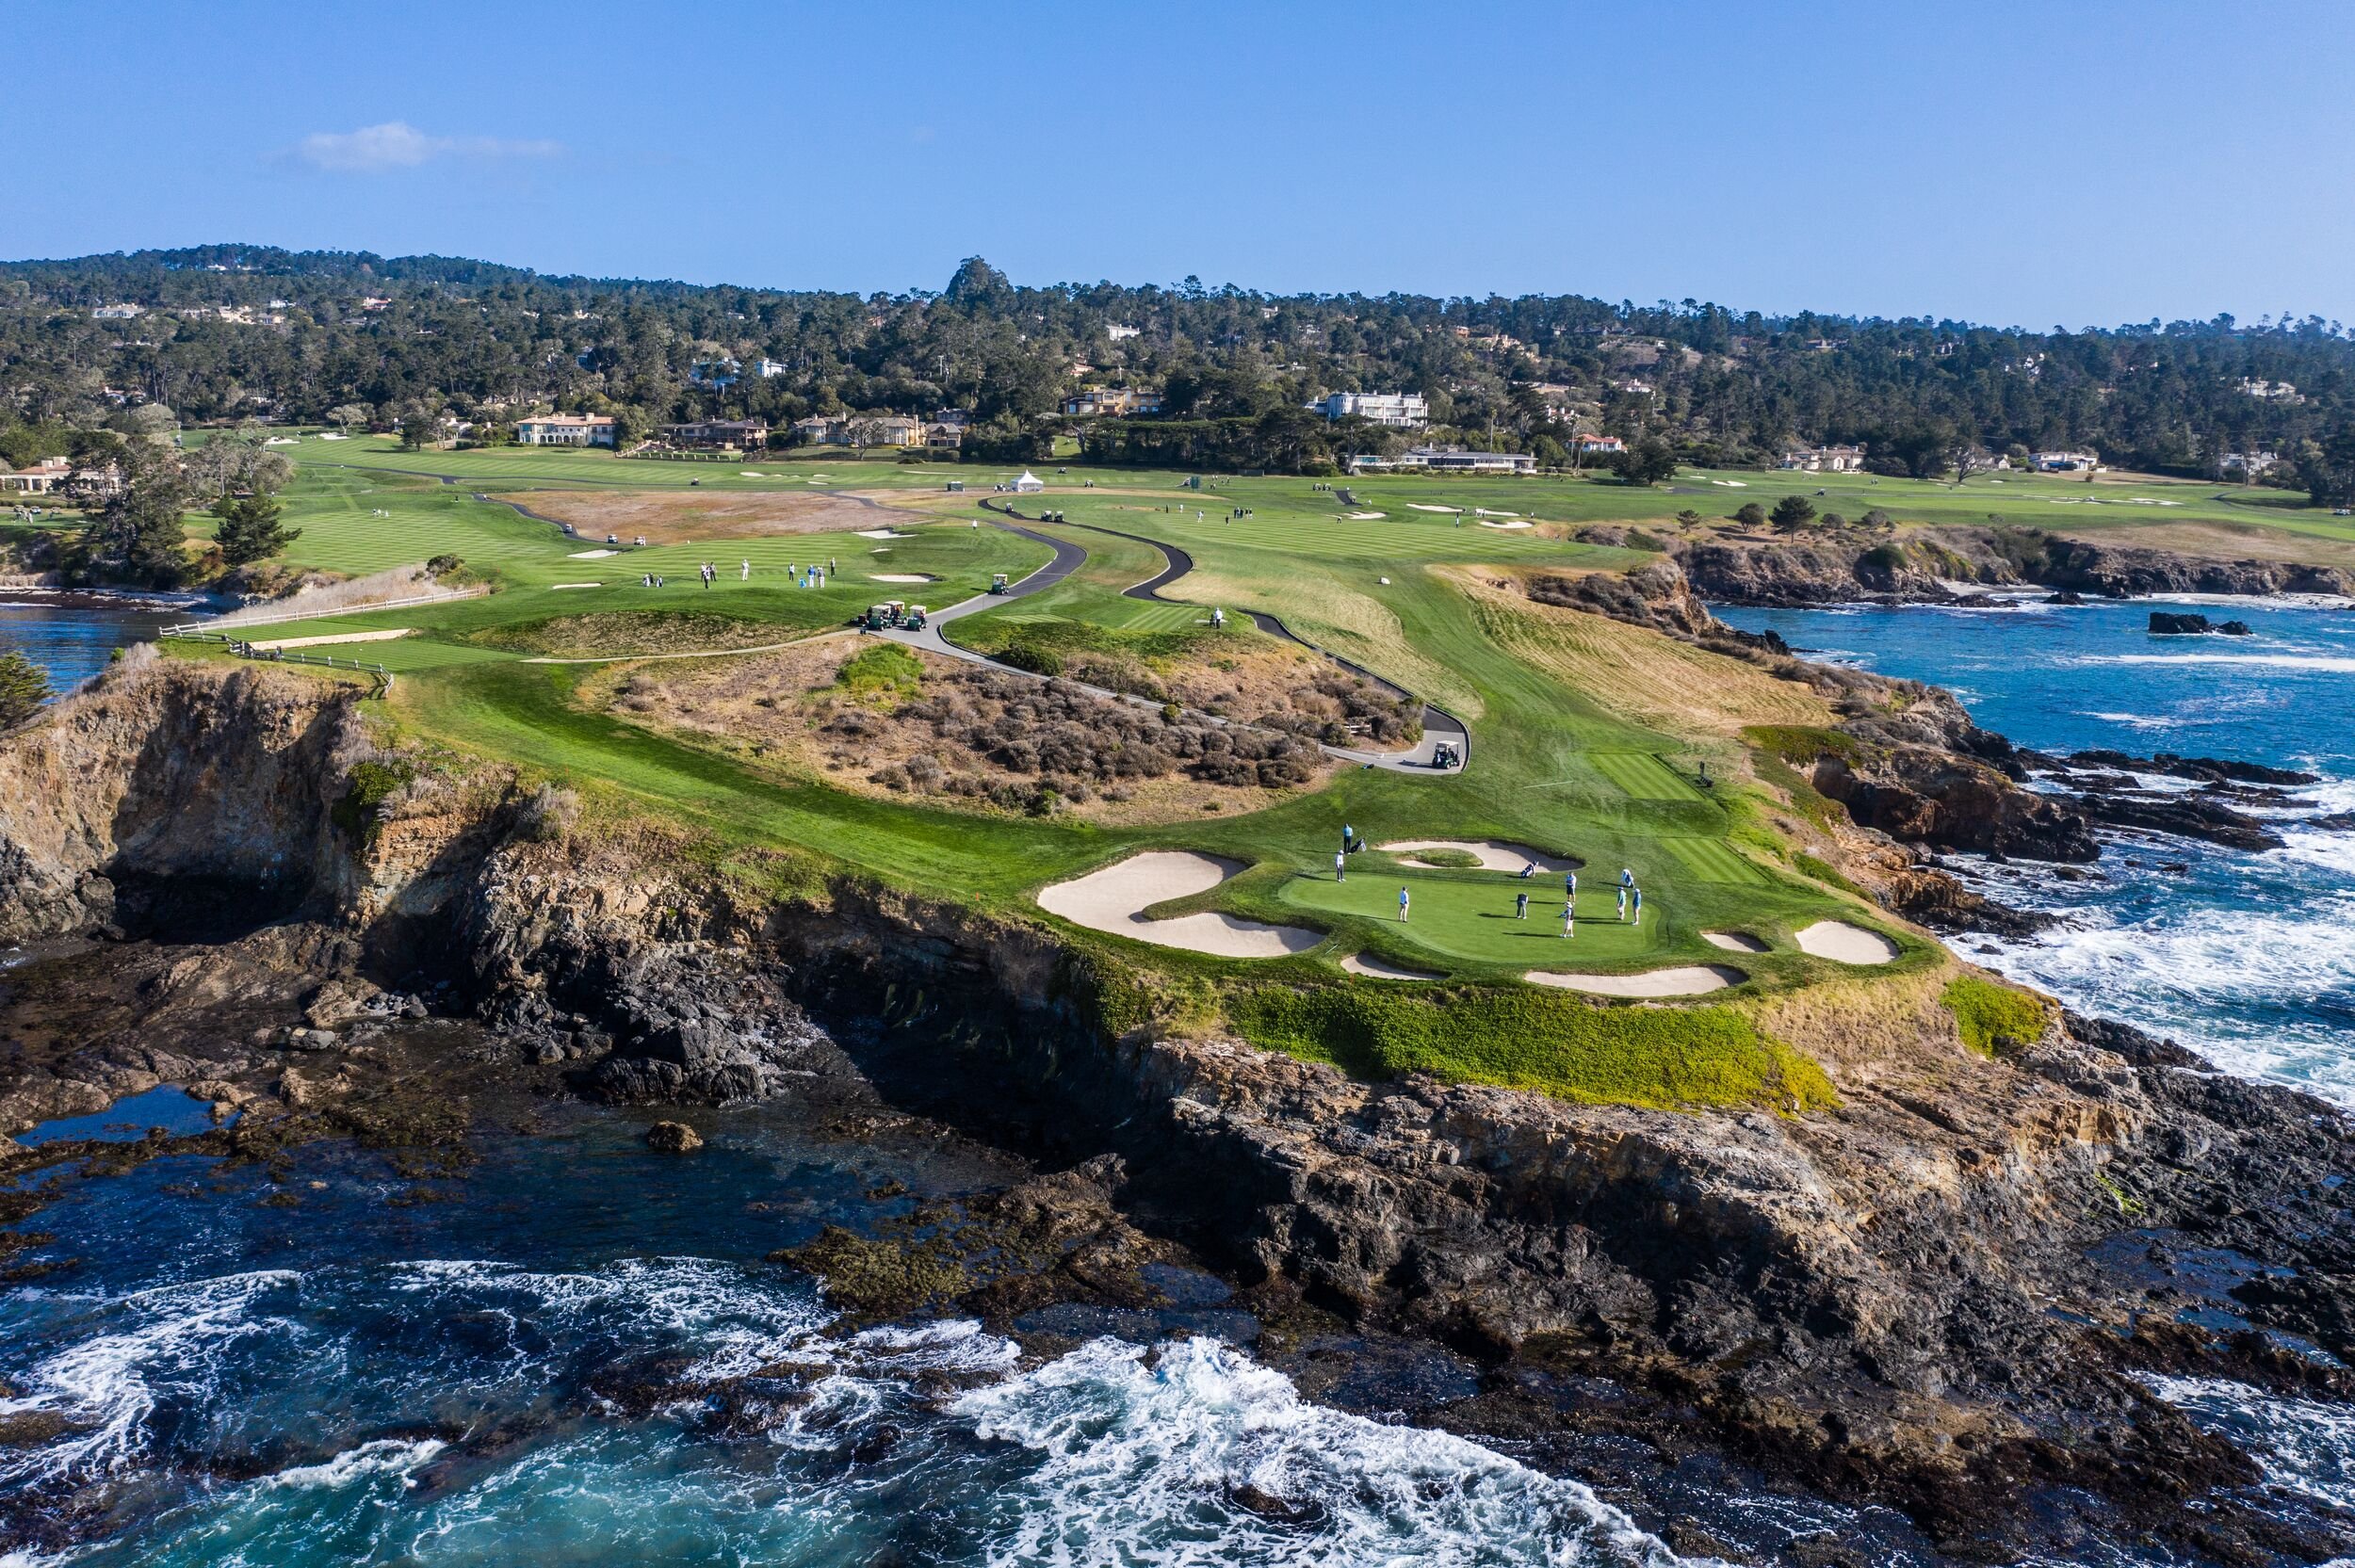 42 Youth on Course Members Invited to Compete at the 2023 PURE Insurance Championship in Pebble Beach, California